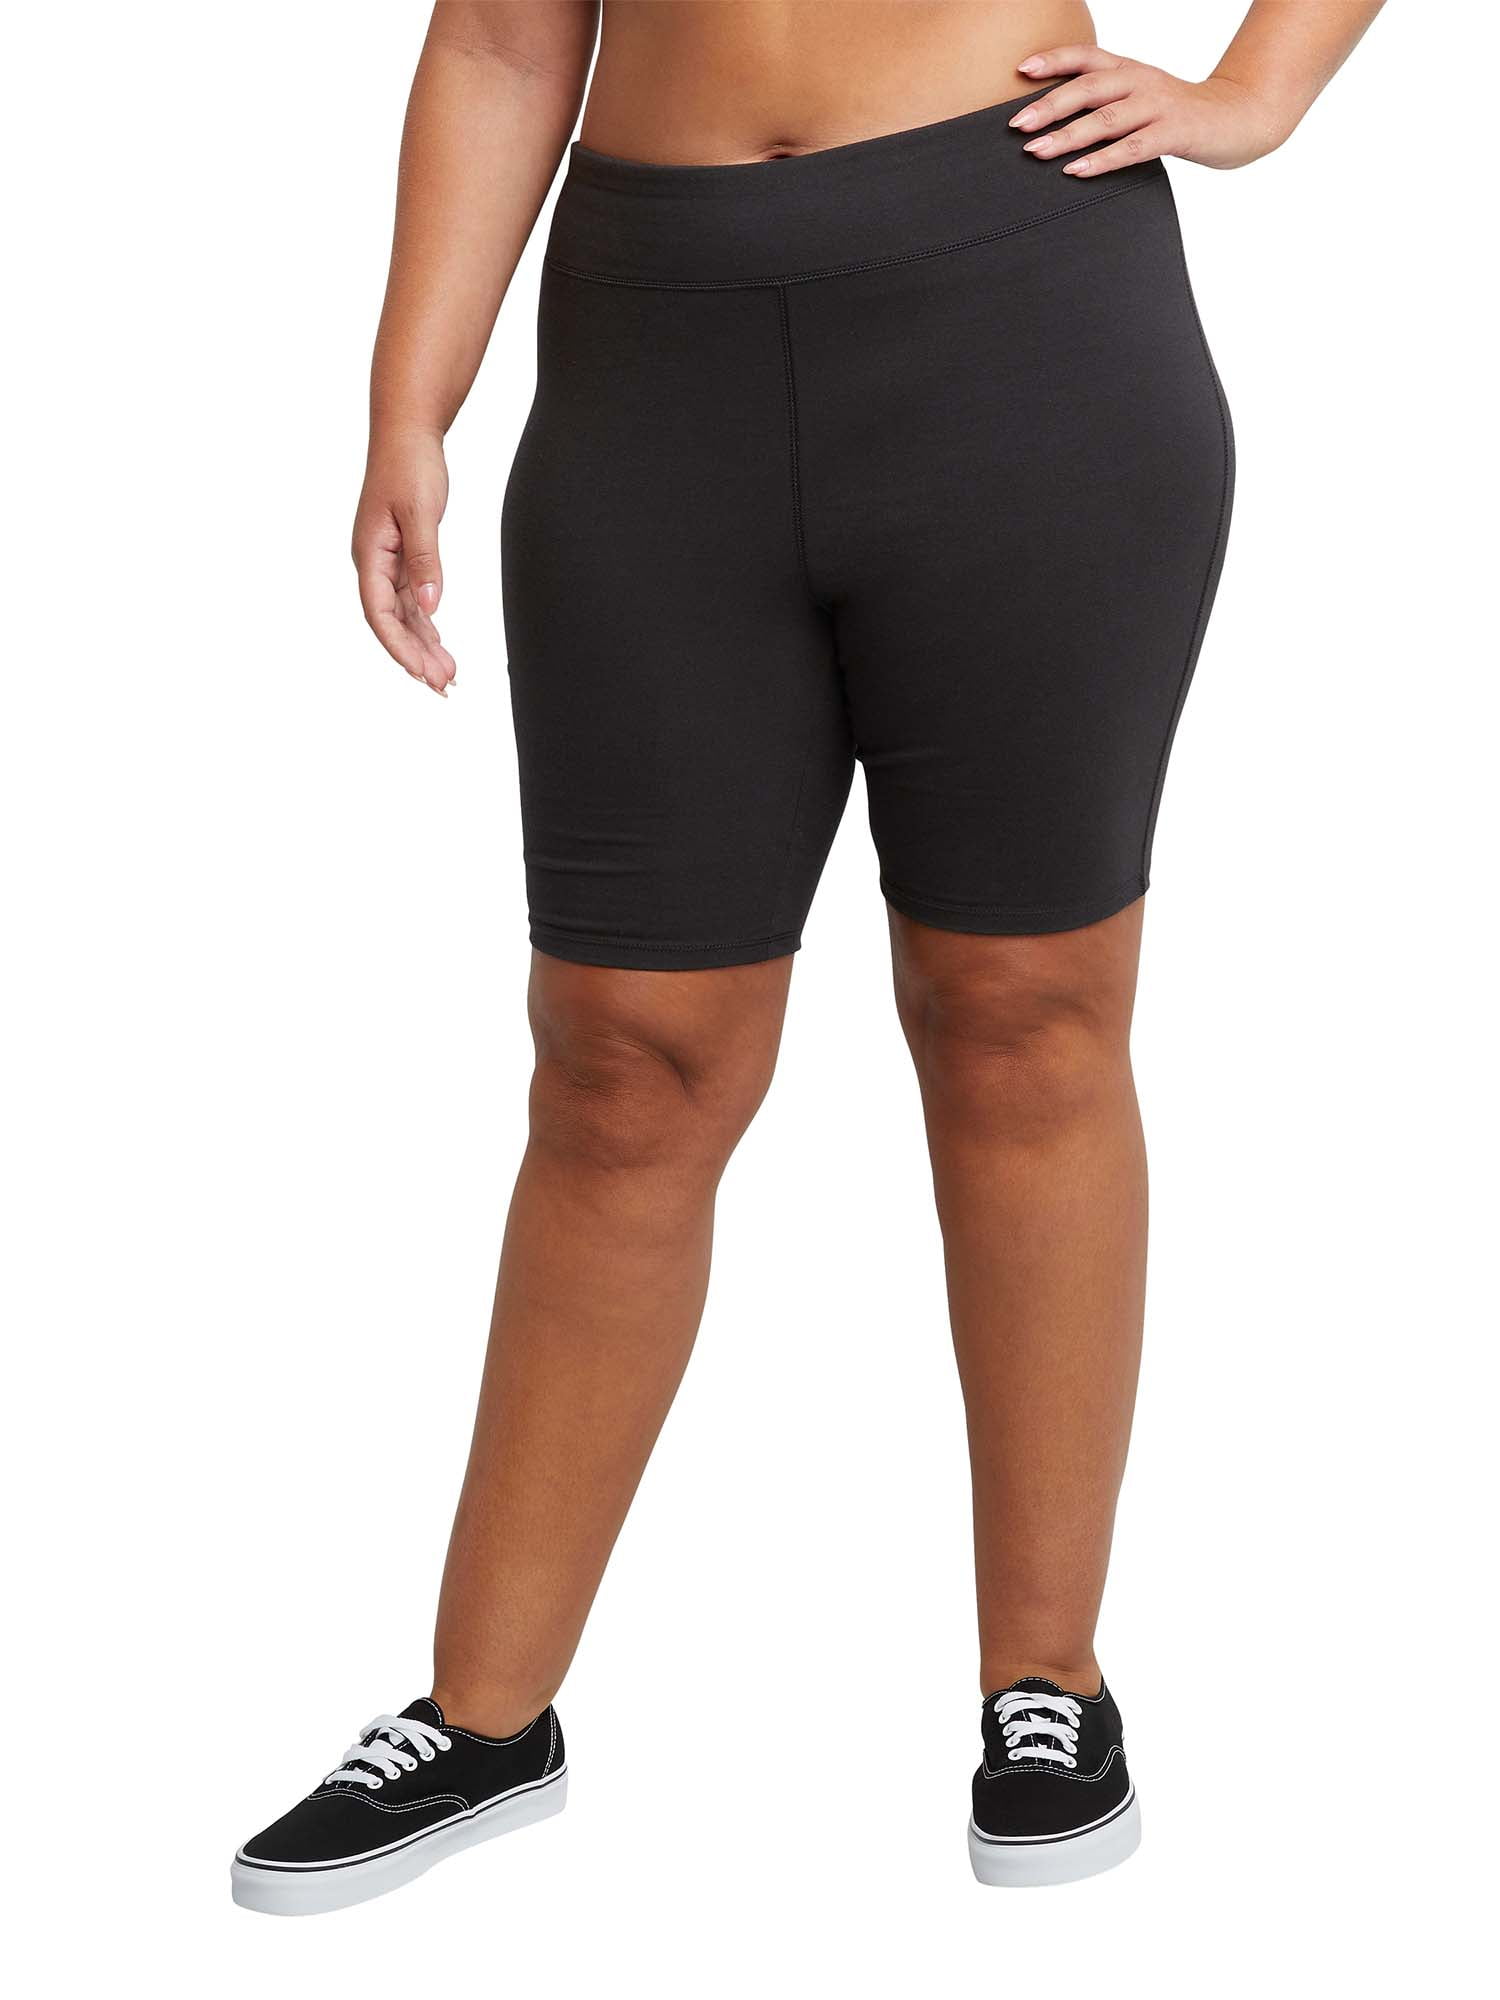 Stretch is Comfort Women's Plus Size Biker Shorts Black X-Large at   Women's Clothing store